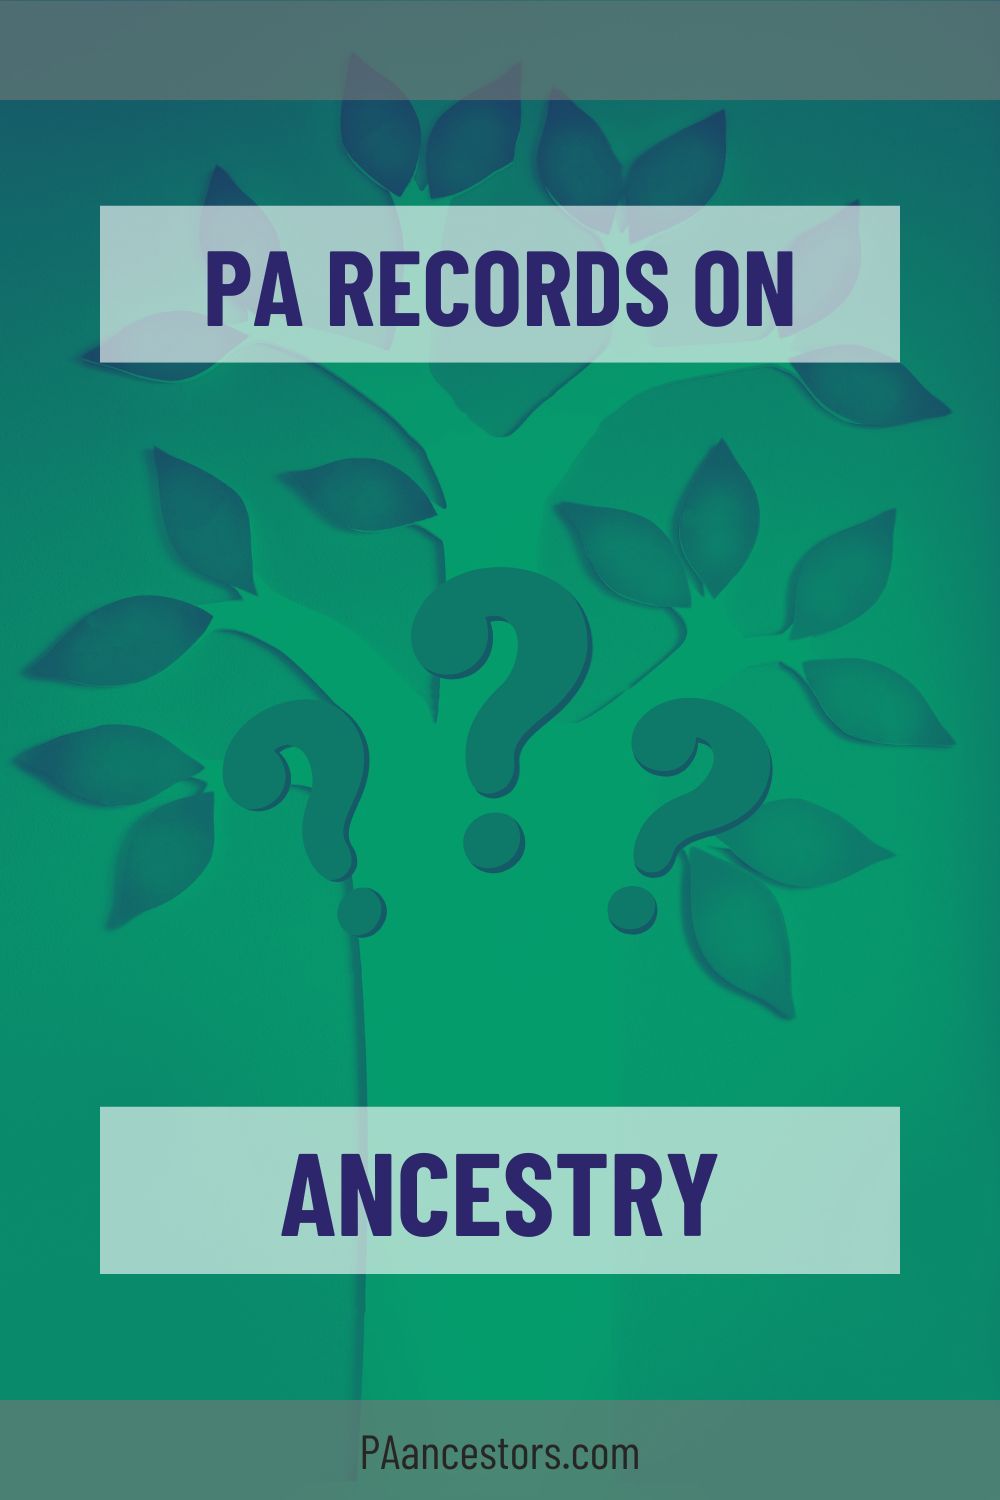 Pennsylvania Genealogy Made Easy: Tips for Ancestry.com Research Success